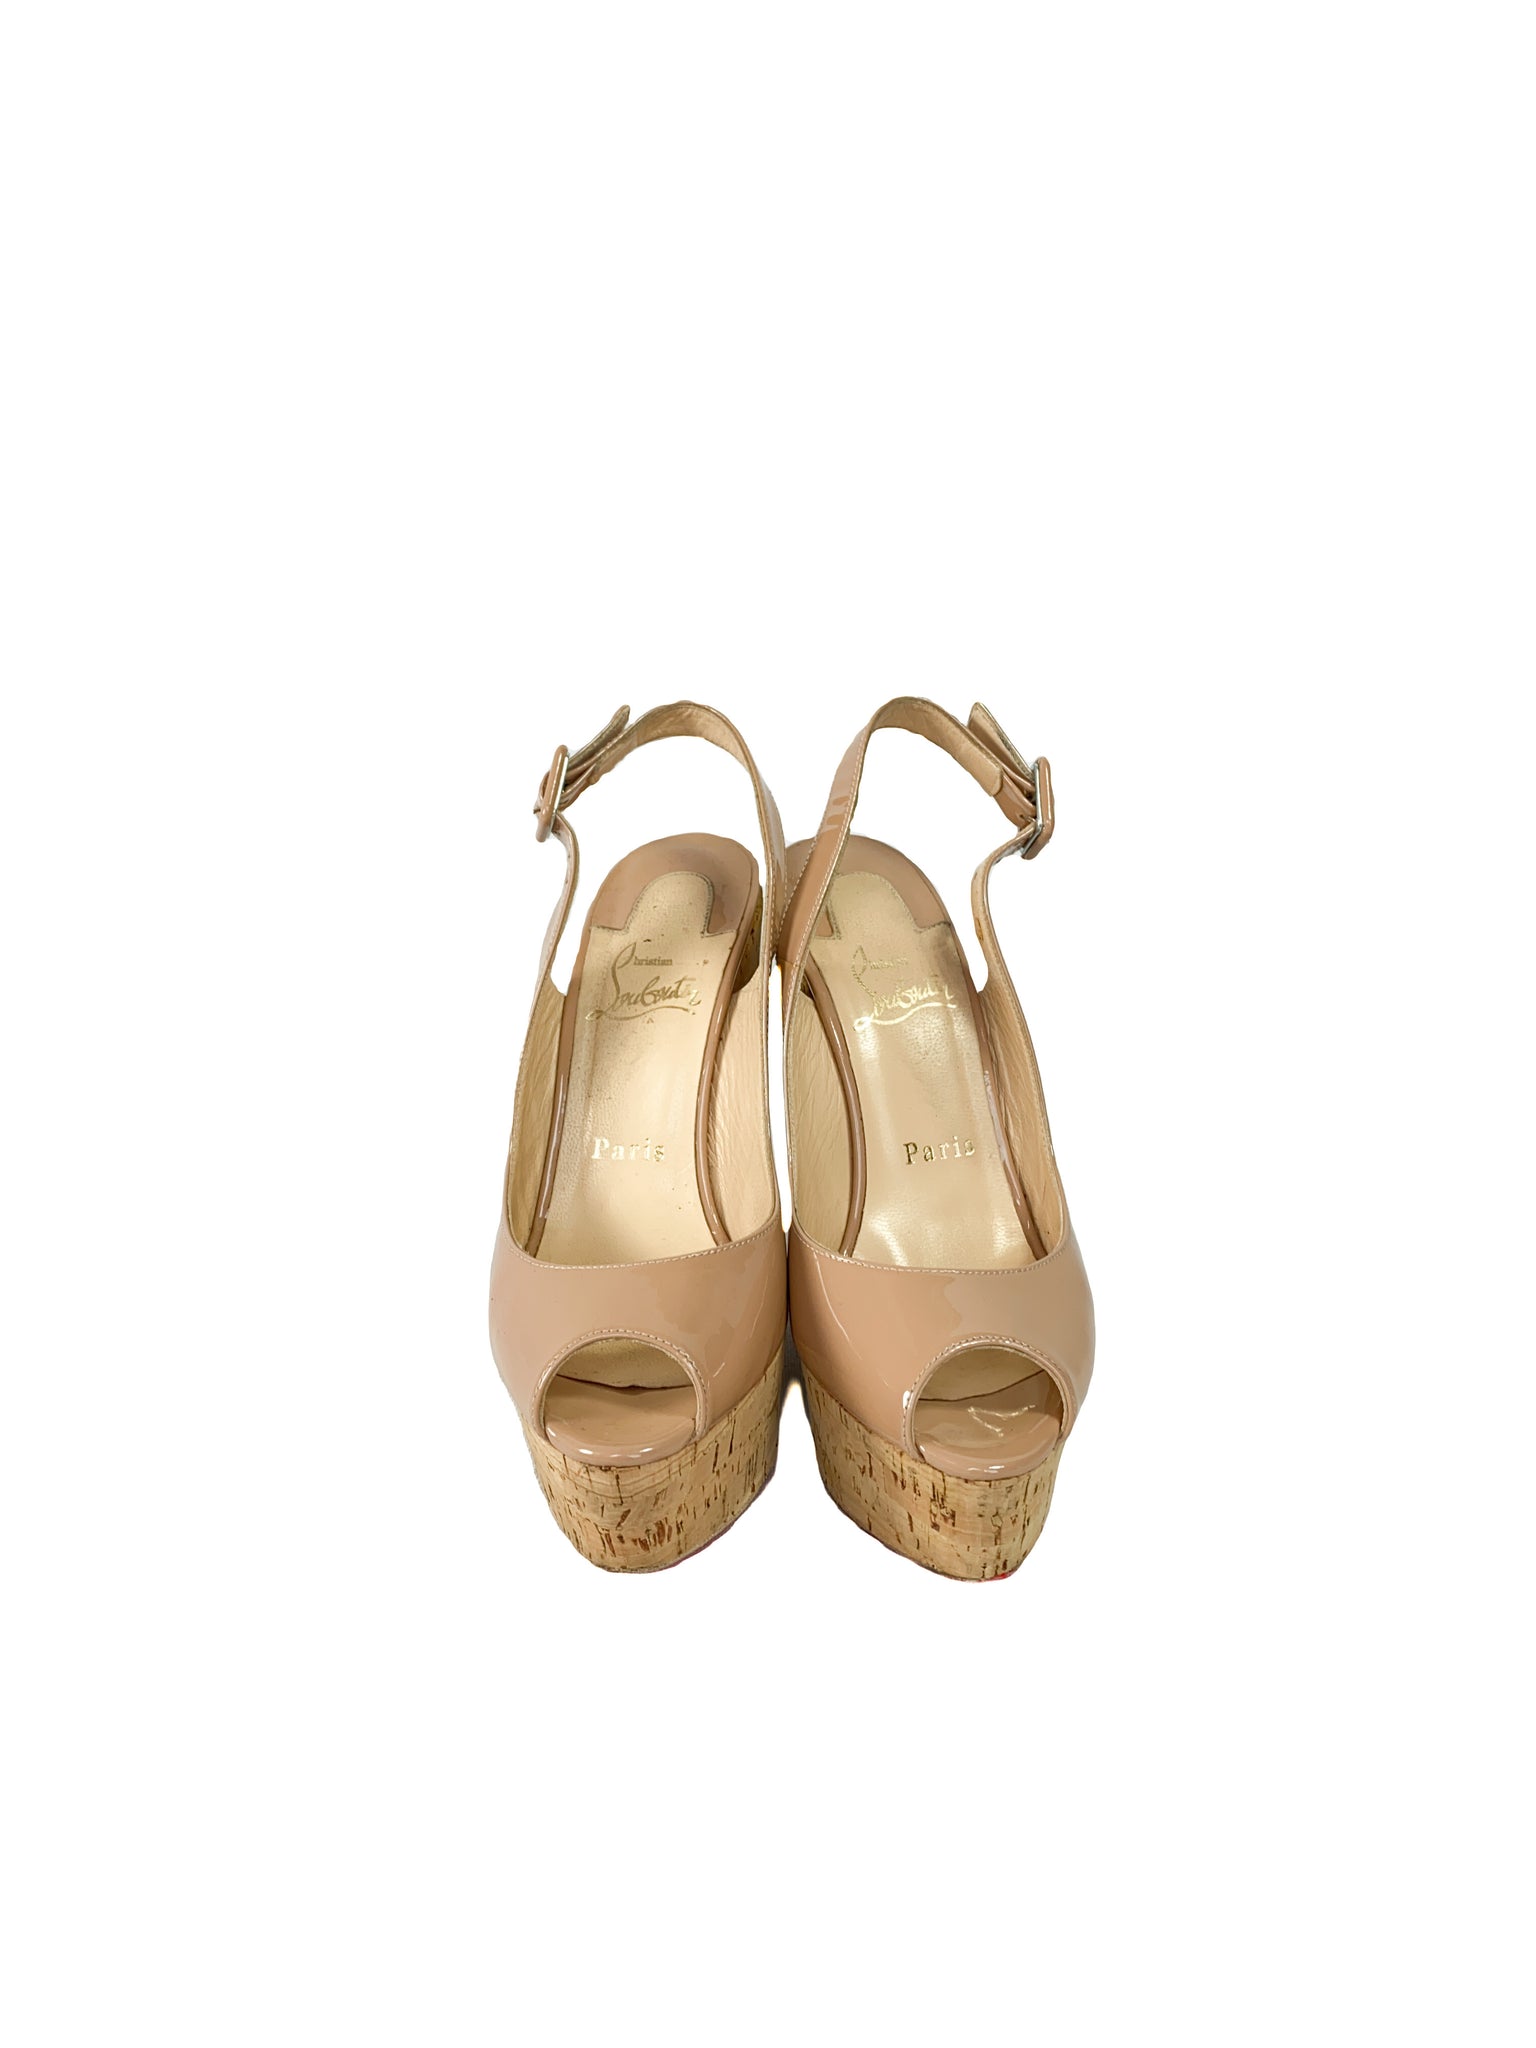 Christian Louboutin nude patent leather wedges size 36.5 – My Girlfriend's  Wardrobe LLC